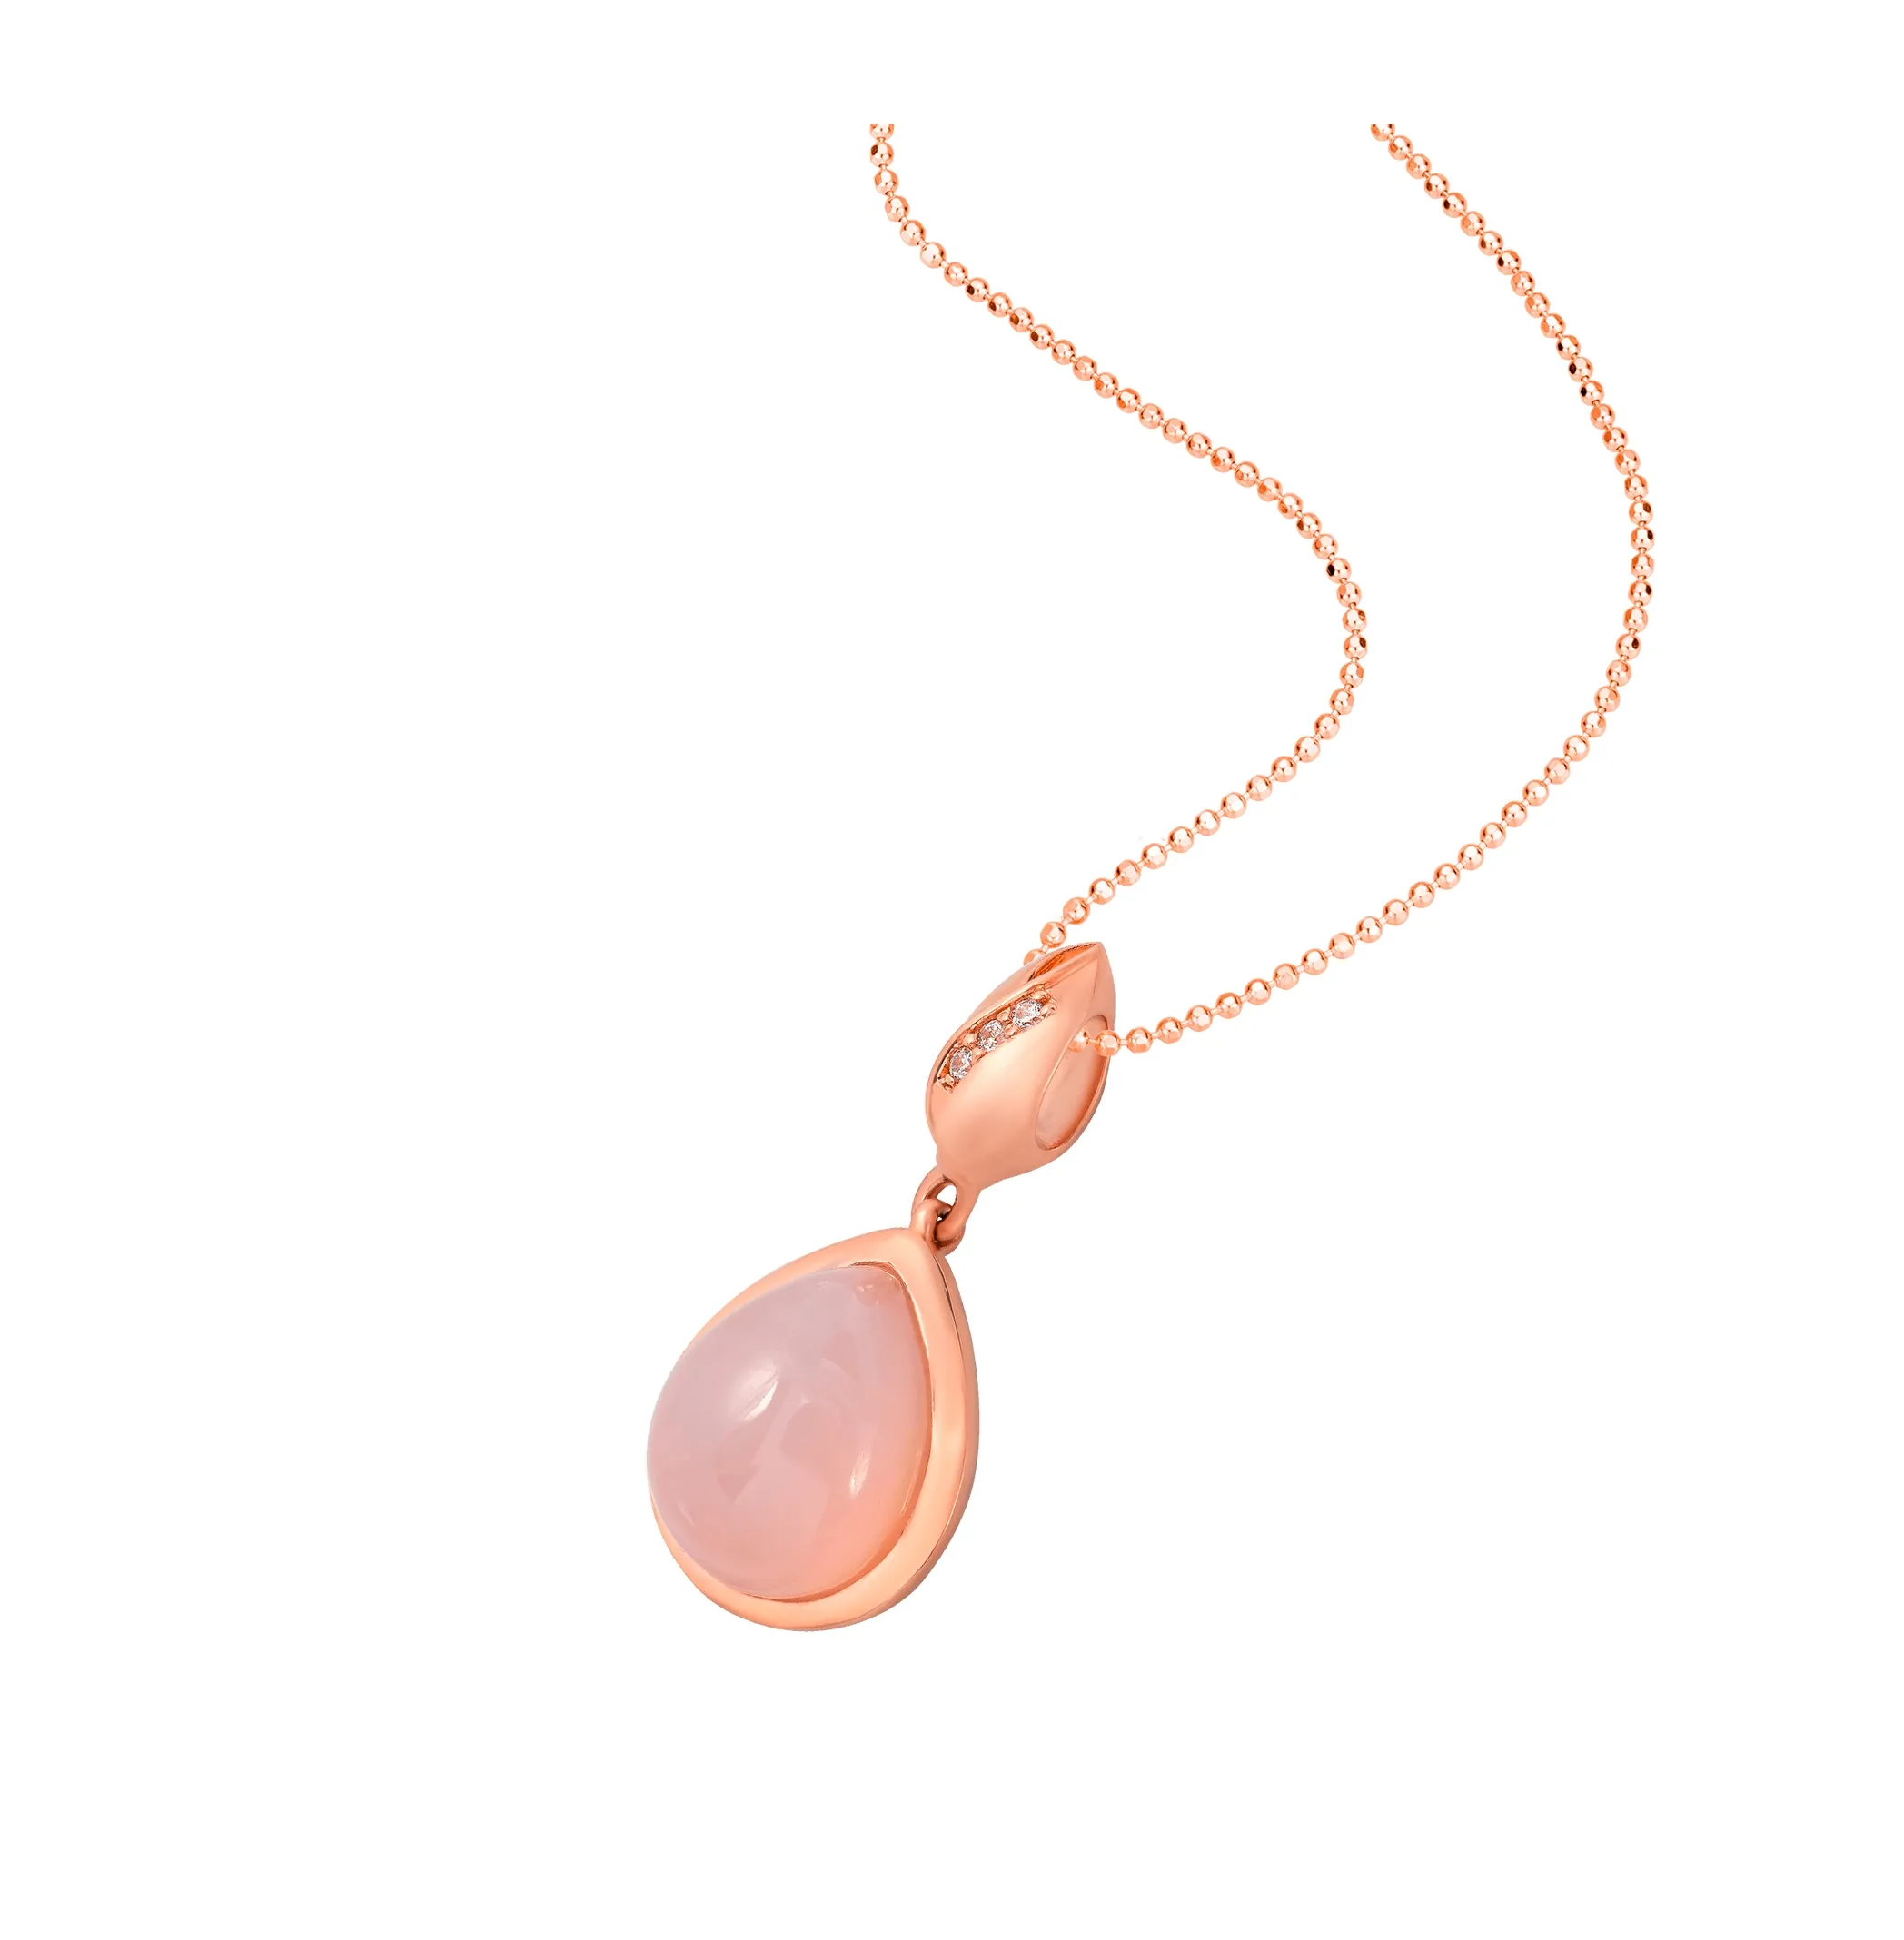 Fashion jewelry necklaces set 14K rose gold matching pendant high quality cabochon moon stone for women by PNJ Vietnam